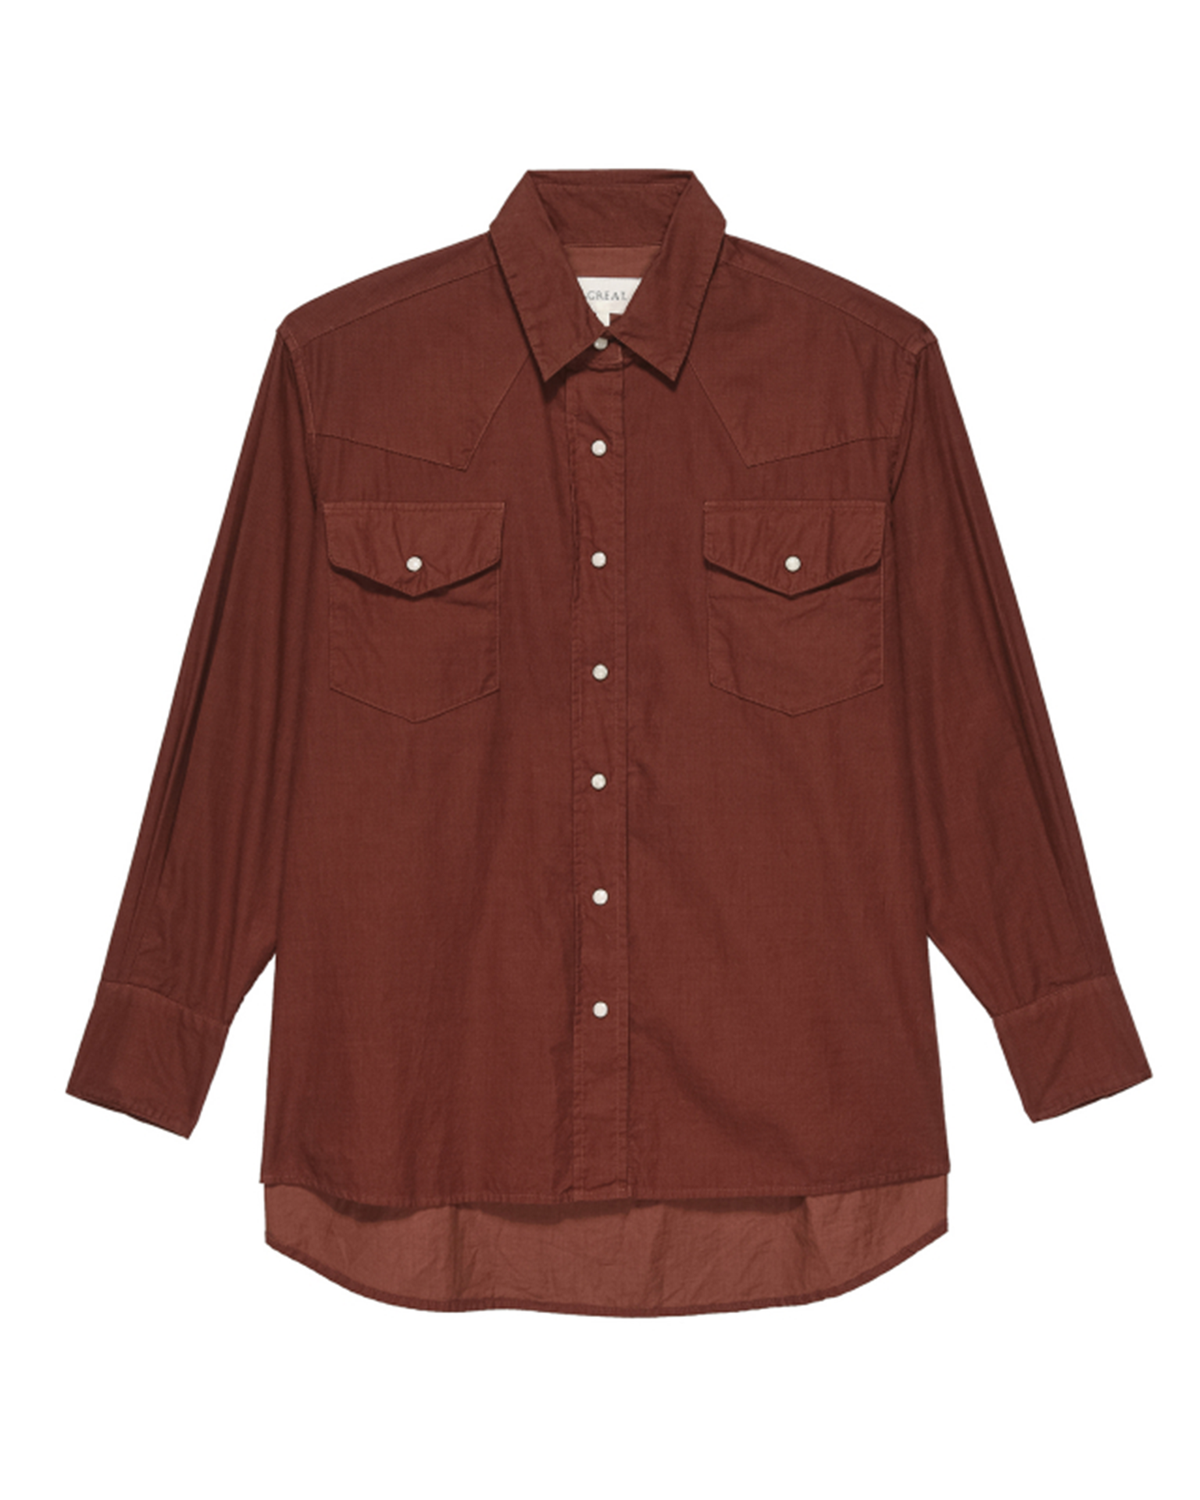 The Heritage Shirt in Strawberry Jam